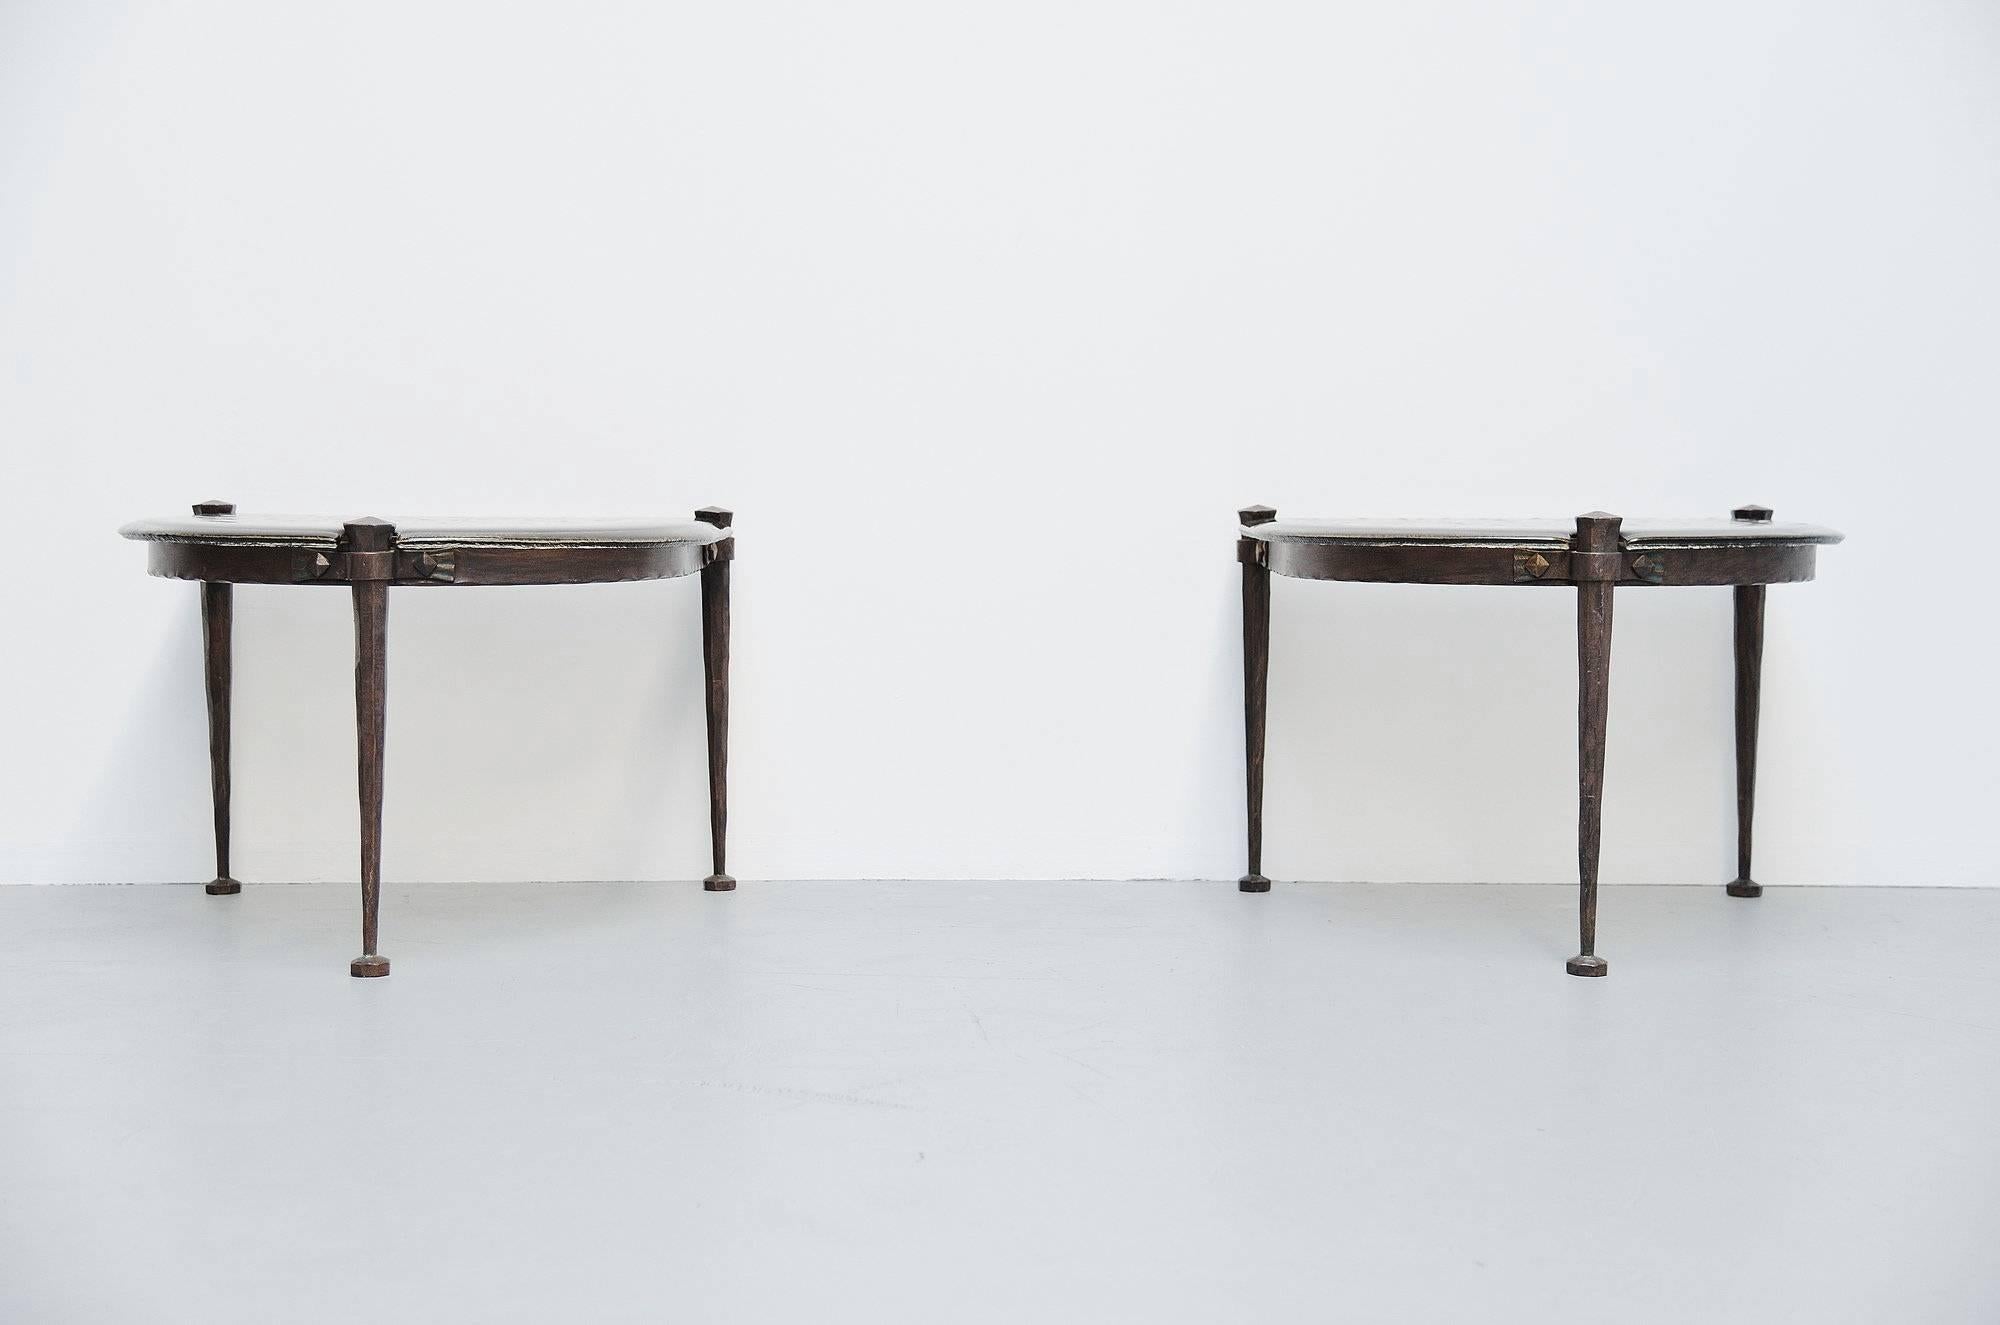 Fantastic pair of side tables designed and manufactured (hand made) by Lothar Klute, Germany 1970. These tables are early editions from Klute made in the early 1970s. The tables are made of solid casted metal, very heavy. And have amazing handblown